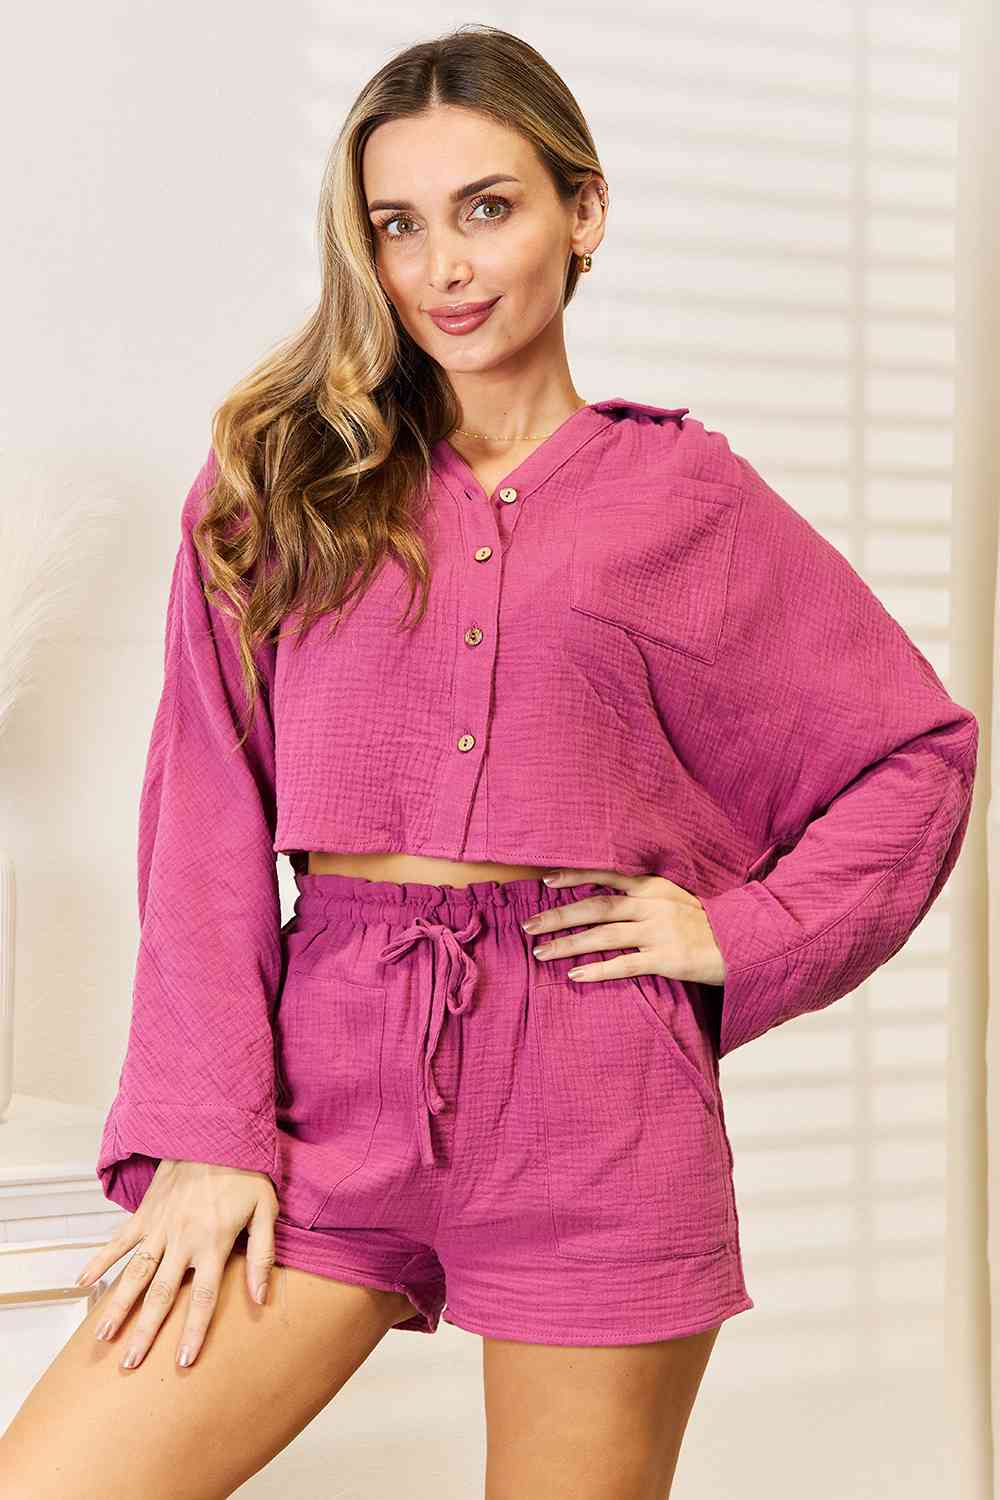 MISS FLO Matching Long Sleeve Top and Shorts Set (S-XL)